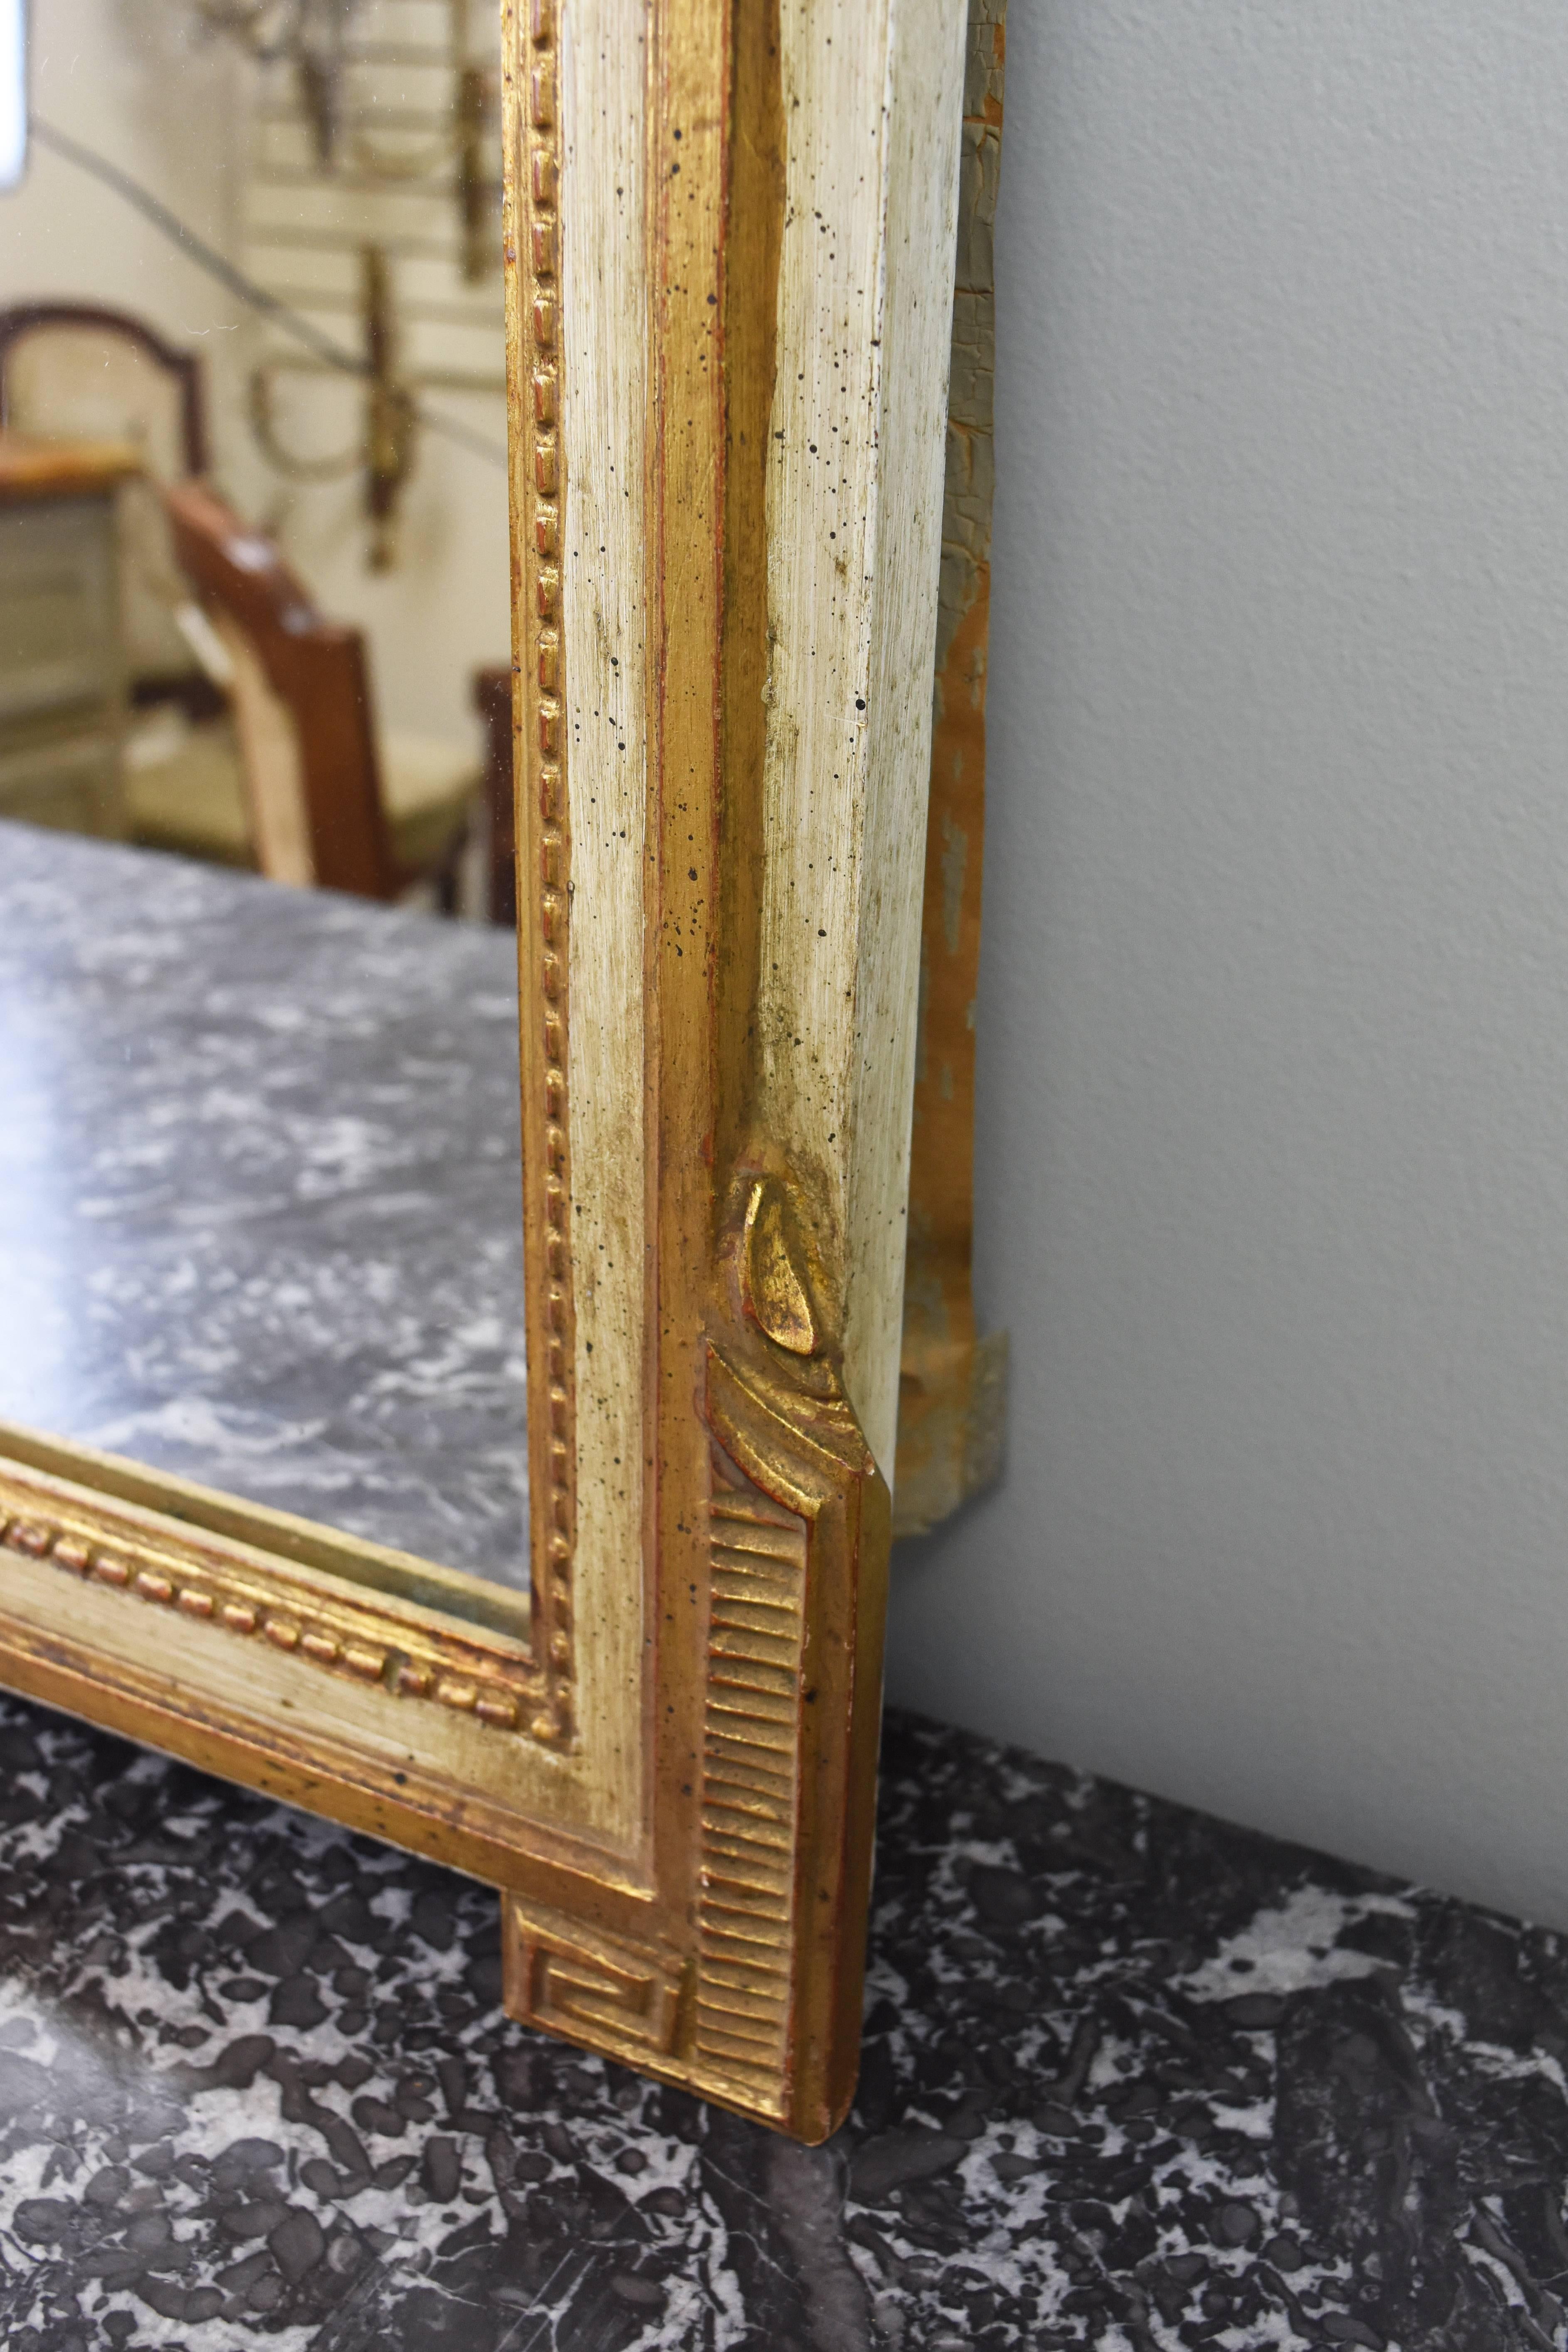 This vintage Italian mirror is decorated with scrolling acanthus leaves, beading and a Greek key design on the bottom frame corners, the finish is a lovely cream color with giltwood accents.